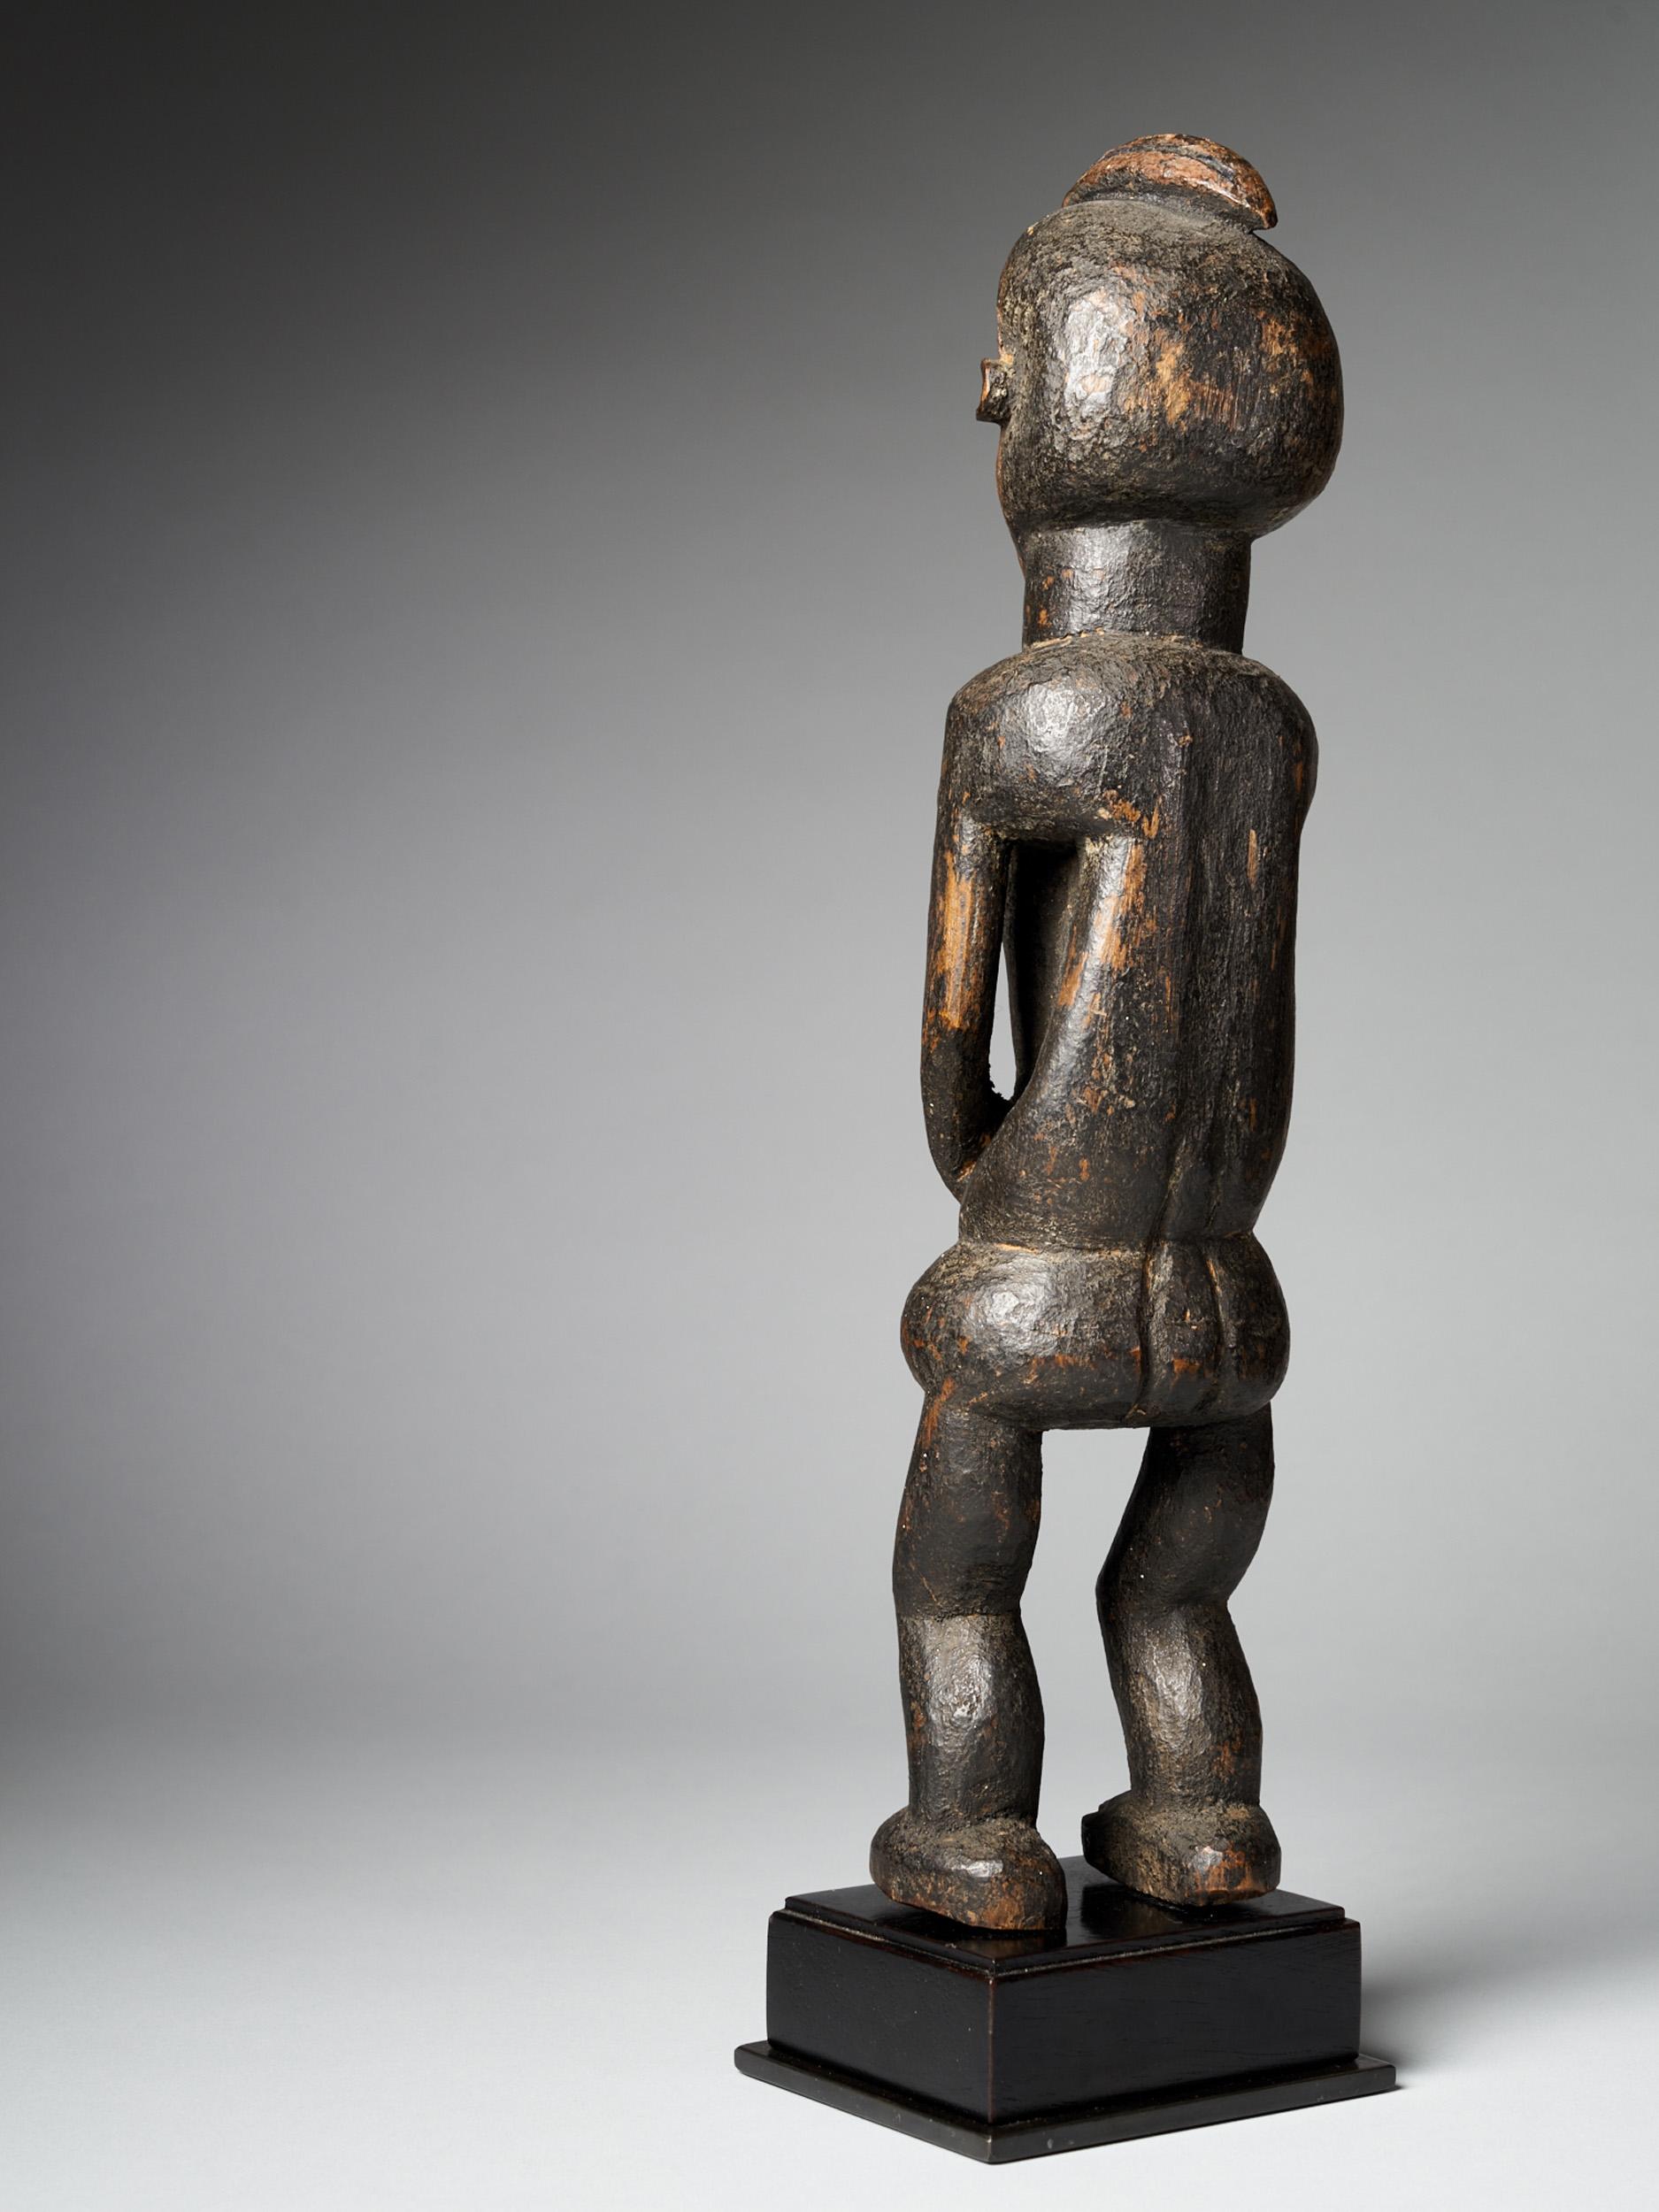 Congolese Holo People, DRC, Female Holo Statue 'Mvunzi' with Traces of Polychrome